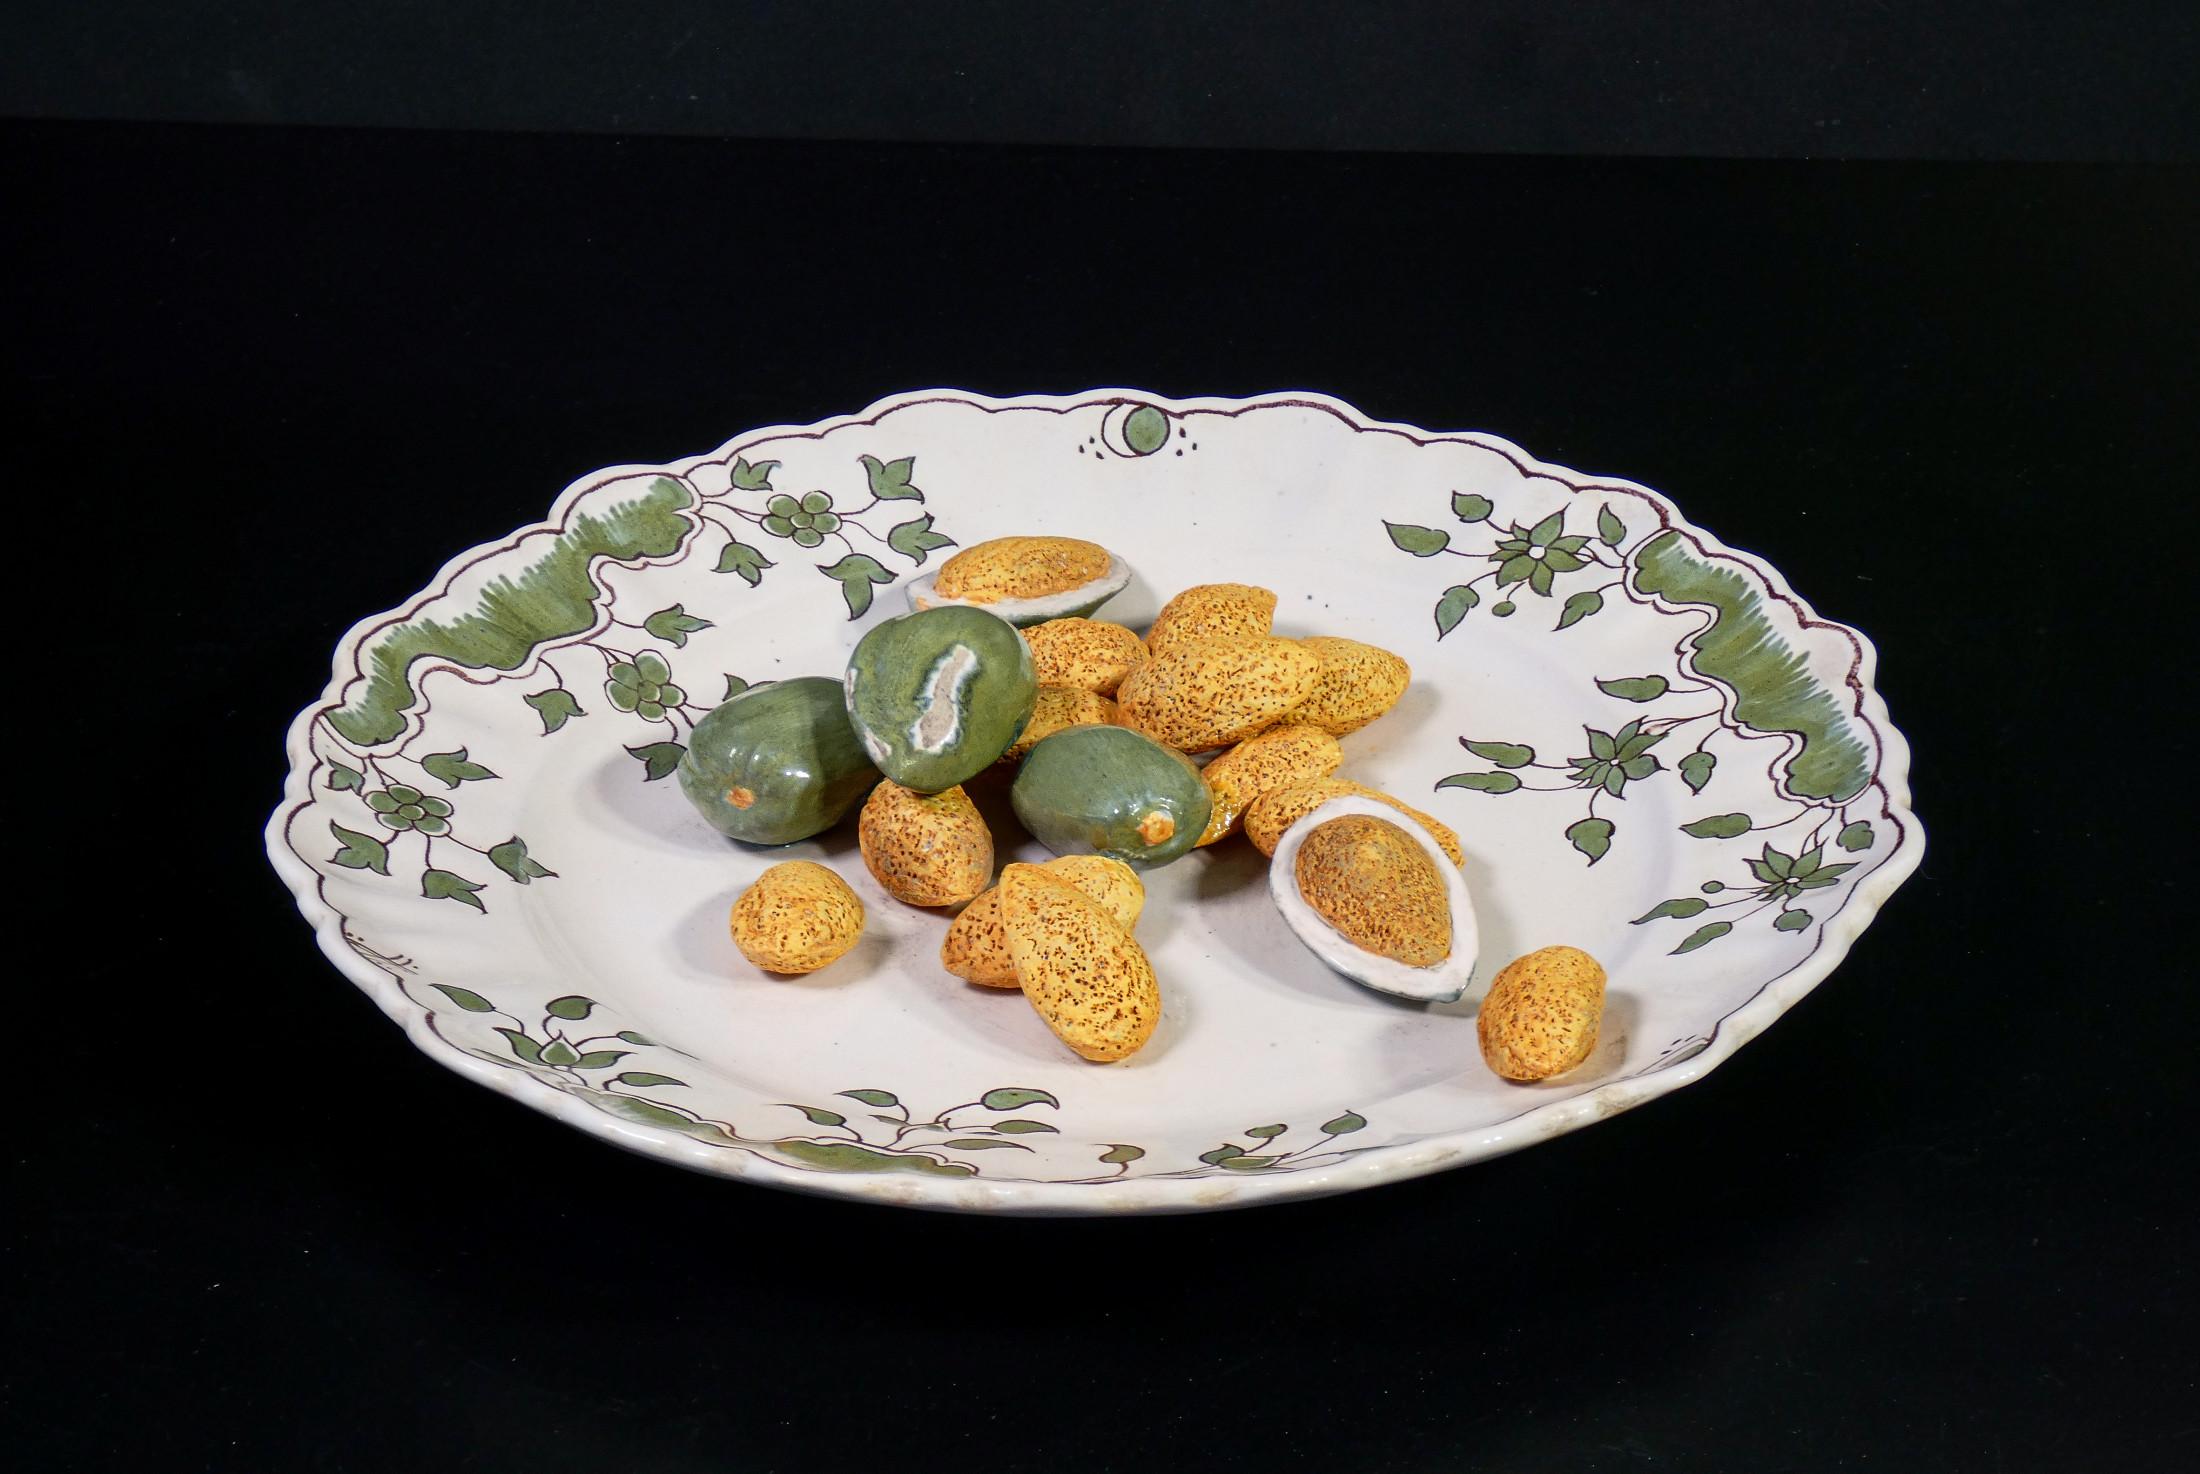 Ceramic plate by
MOUSTIERS
with almonds sculpture.
Hand painted.

ORIGIN
France

PERIOD
Late nineteenth century,
early twentieth century

BRAND
Manufacture of Moustiers

MATERIALS
Hand modeled and painted ceramic

DIMENSIONS
Ø